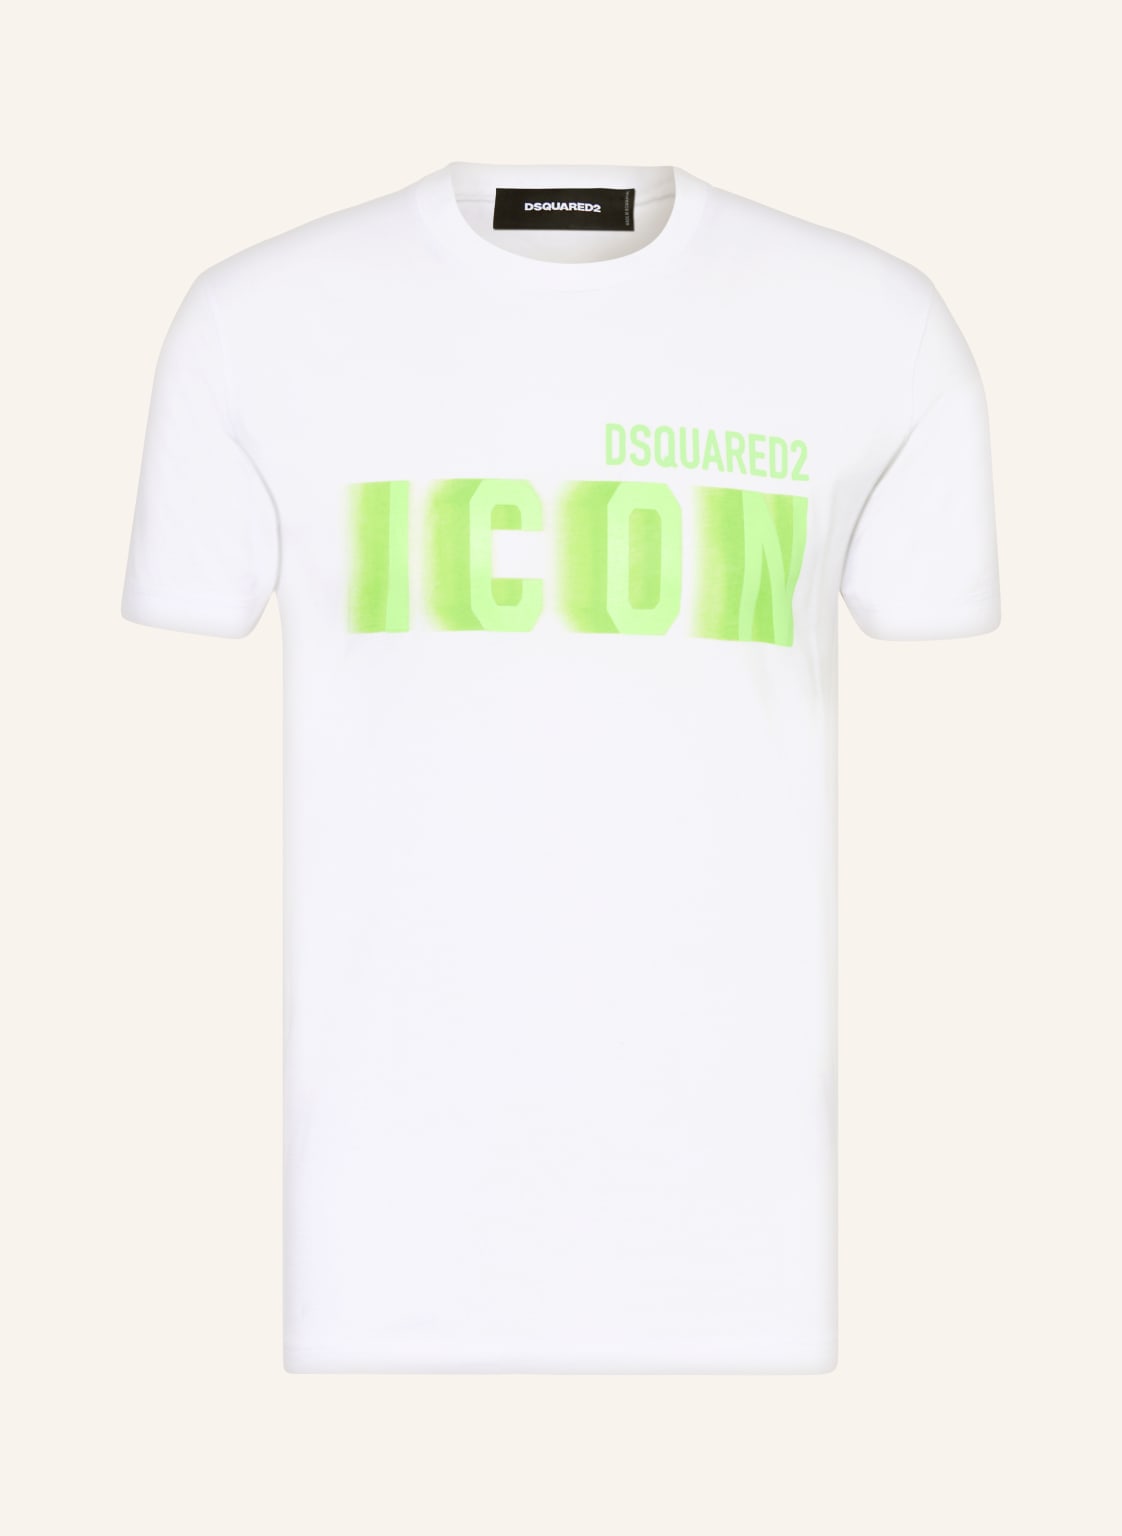 dsquared2 T-Shirt Icon weiss von Dsquared2